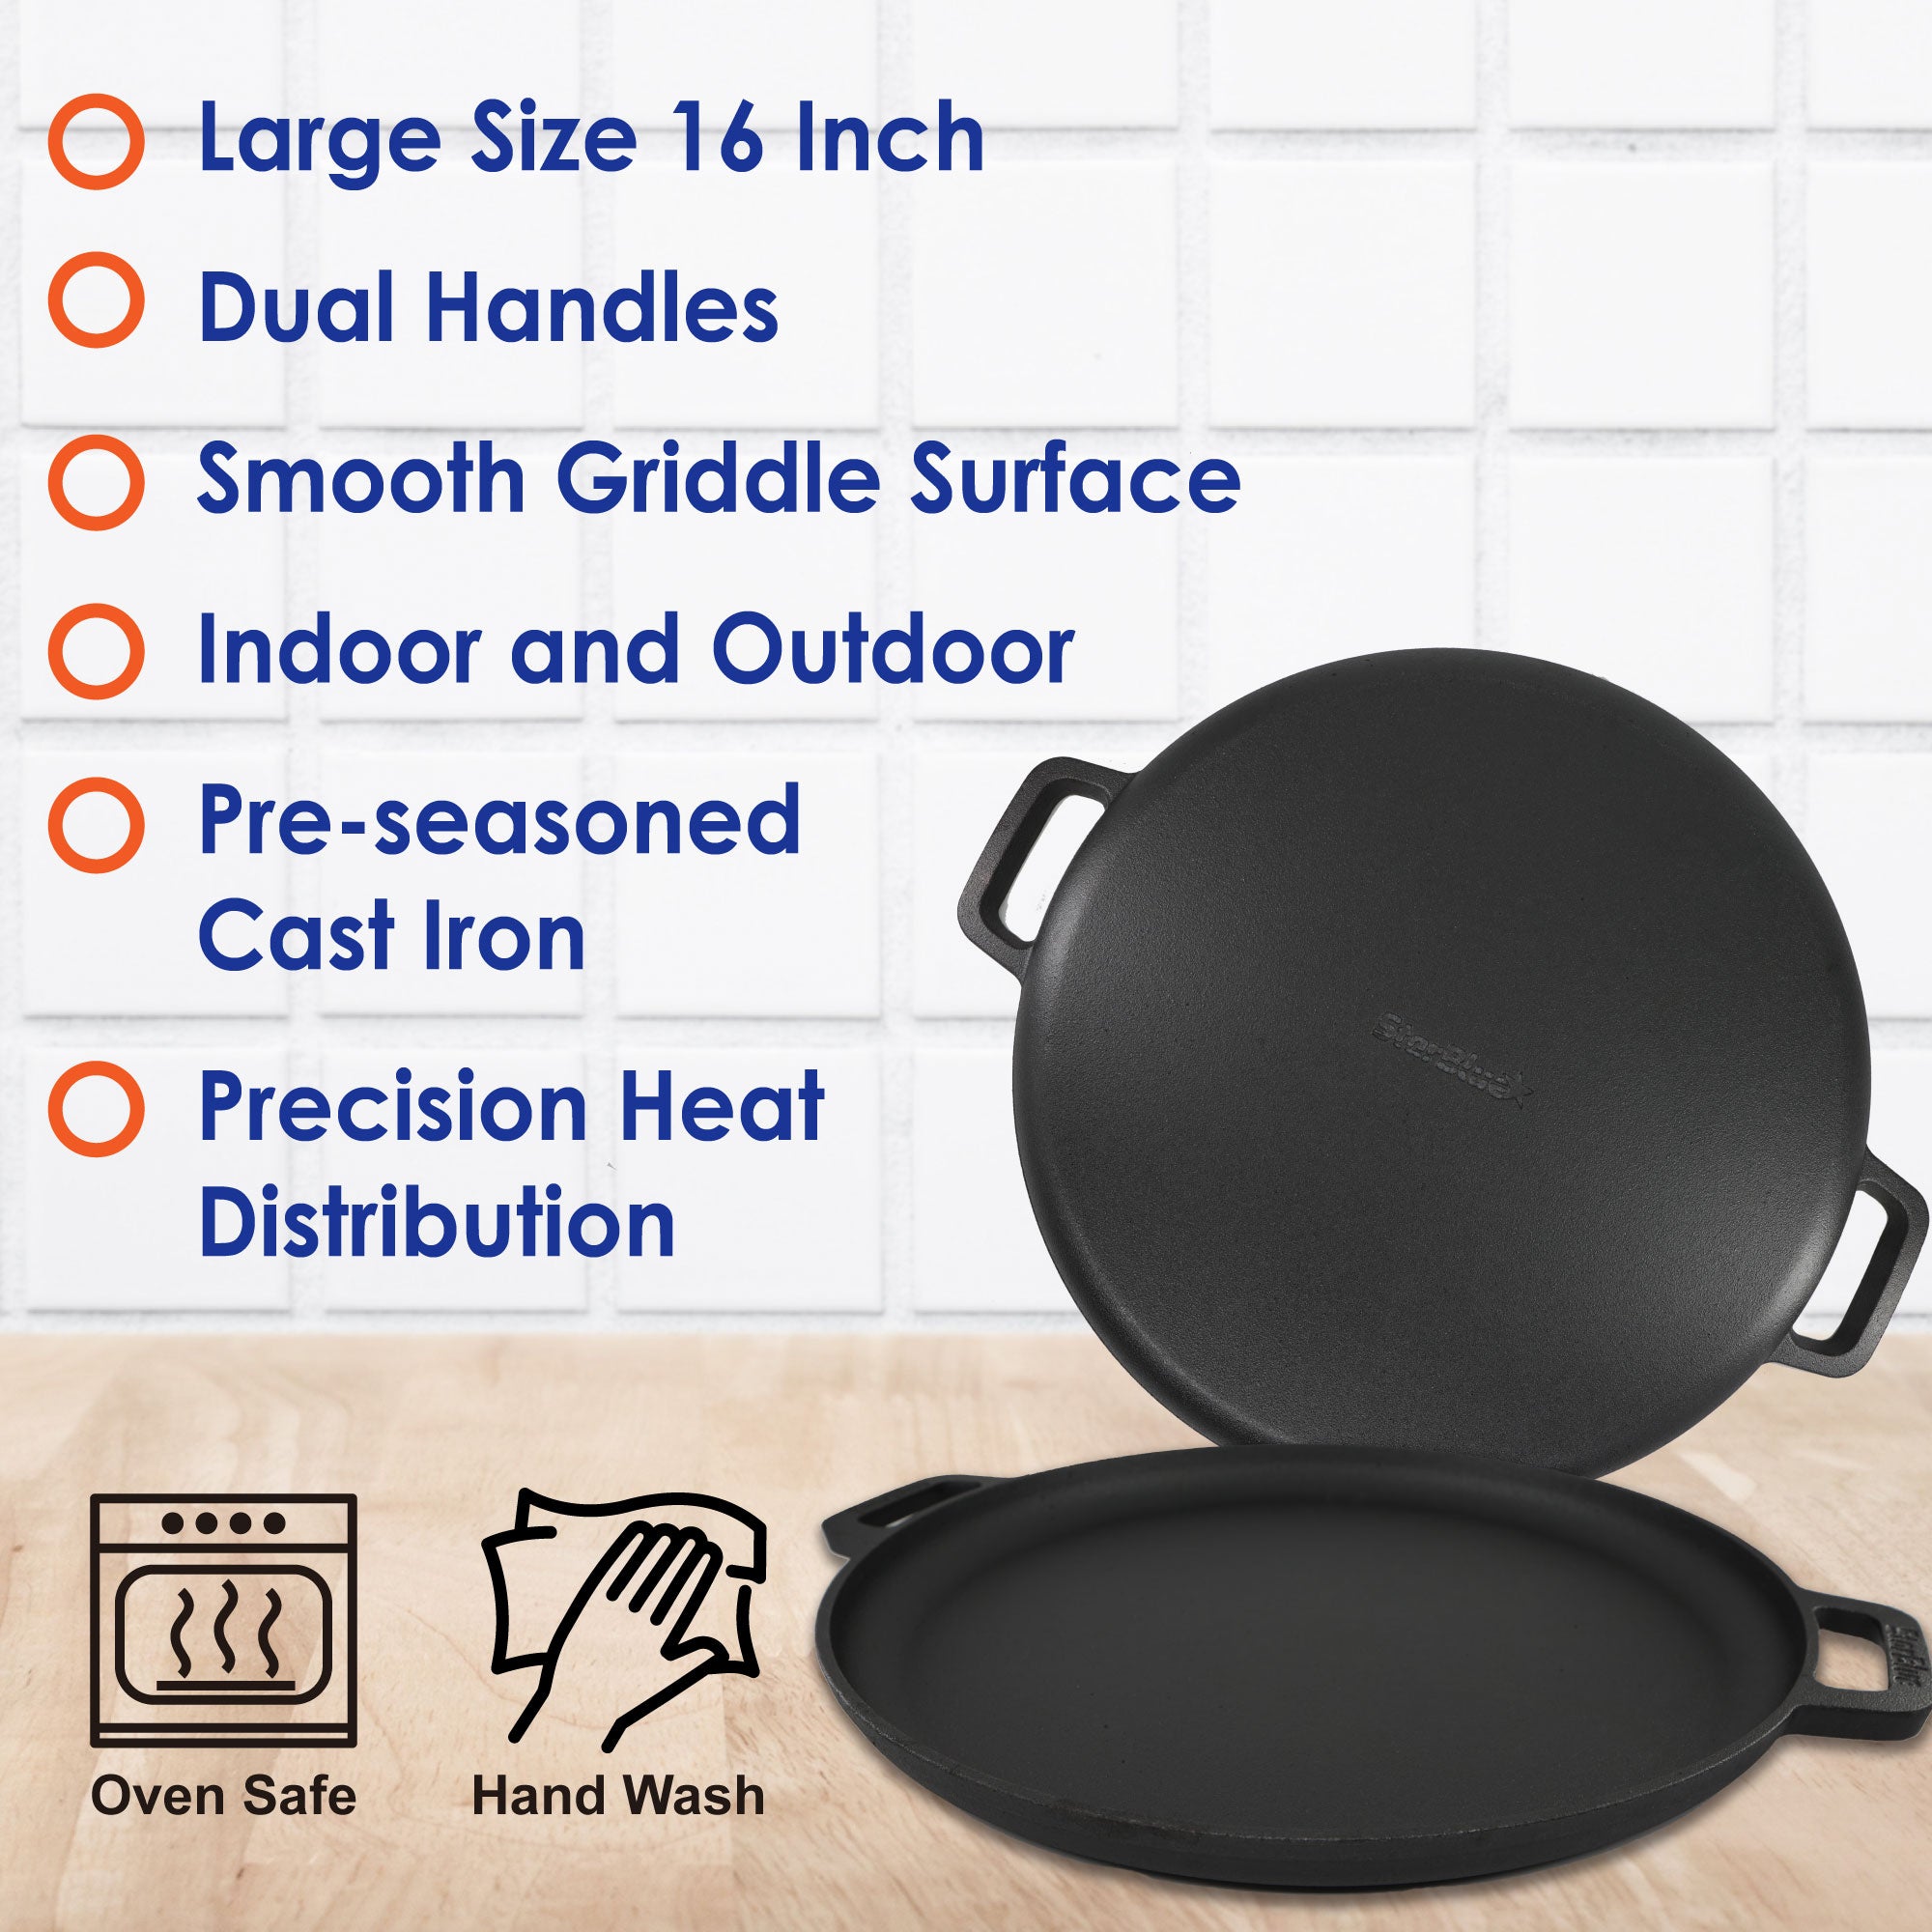 StarBlue 16 inch Cast Iron Pizza Pan Round Griddle with Free Silicone Handles and 30 Recipes Ebook– Pre-Seasoned Comal, Kitchen Essentials for